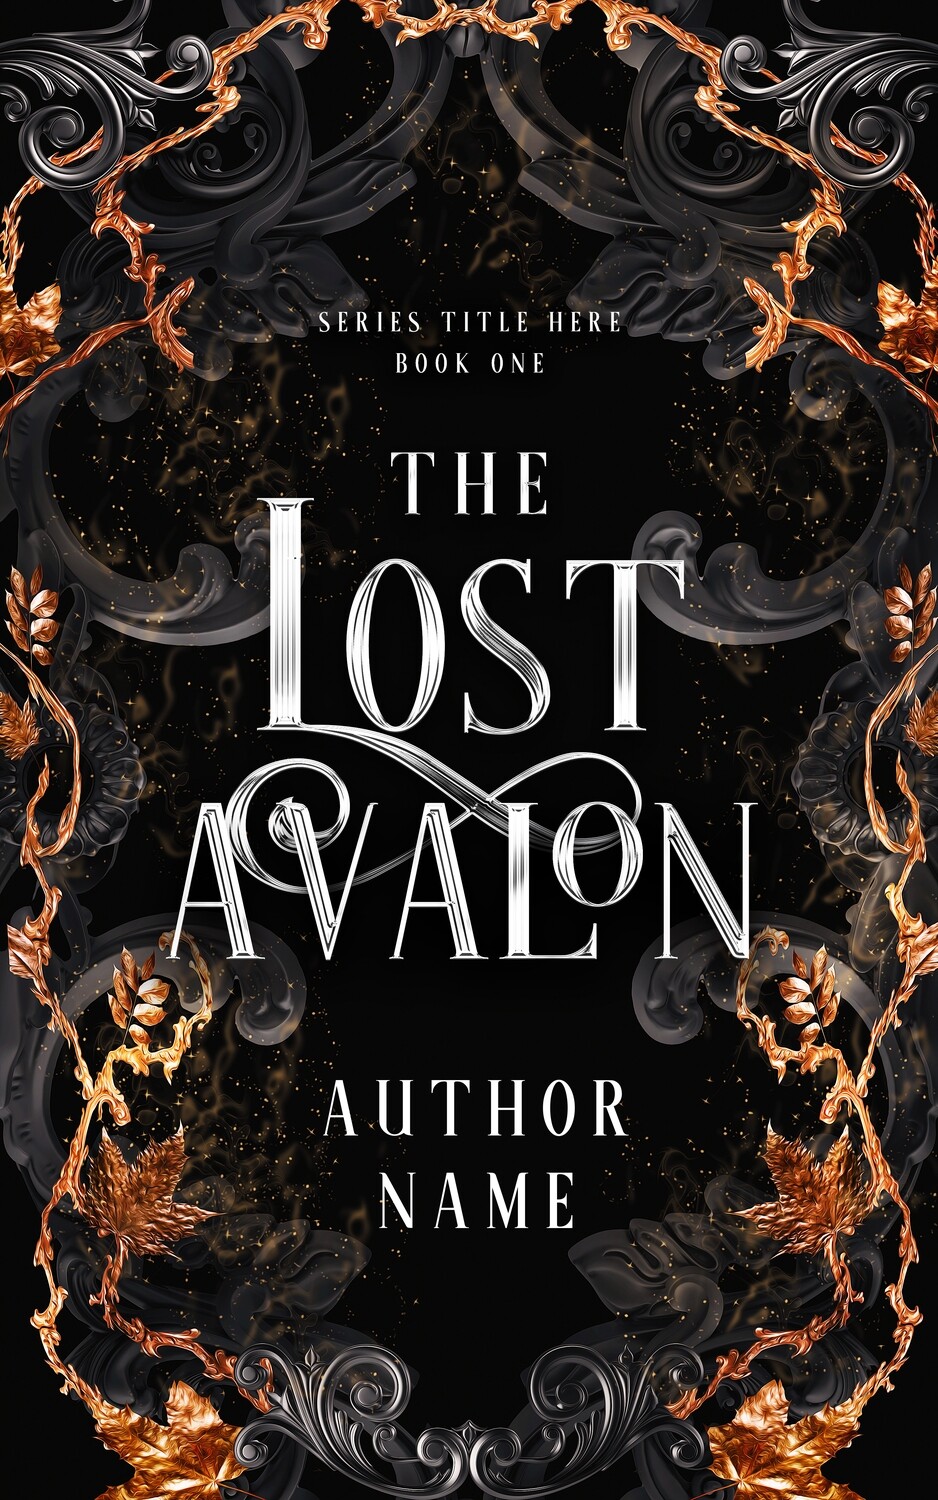 THE LOST AVALON